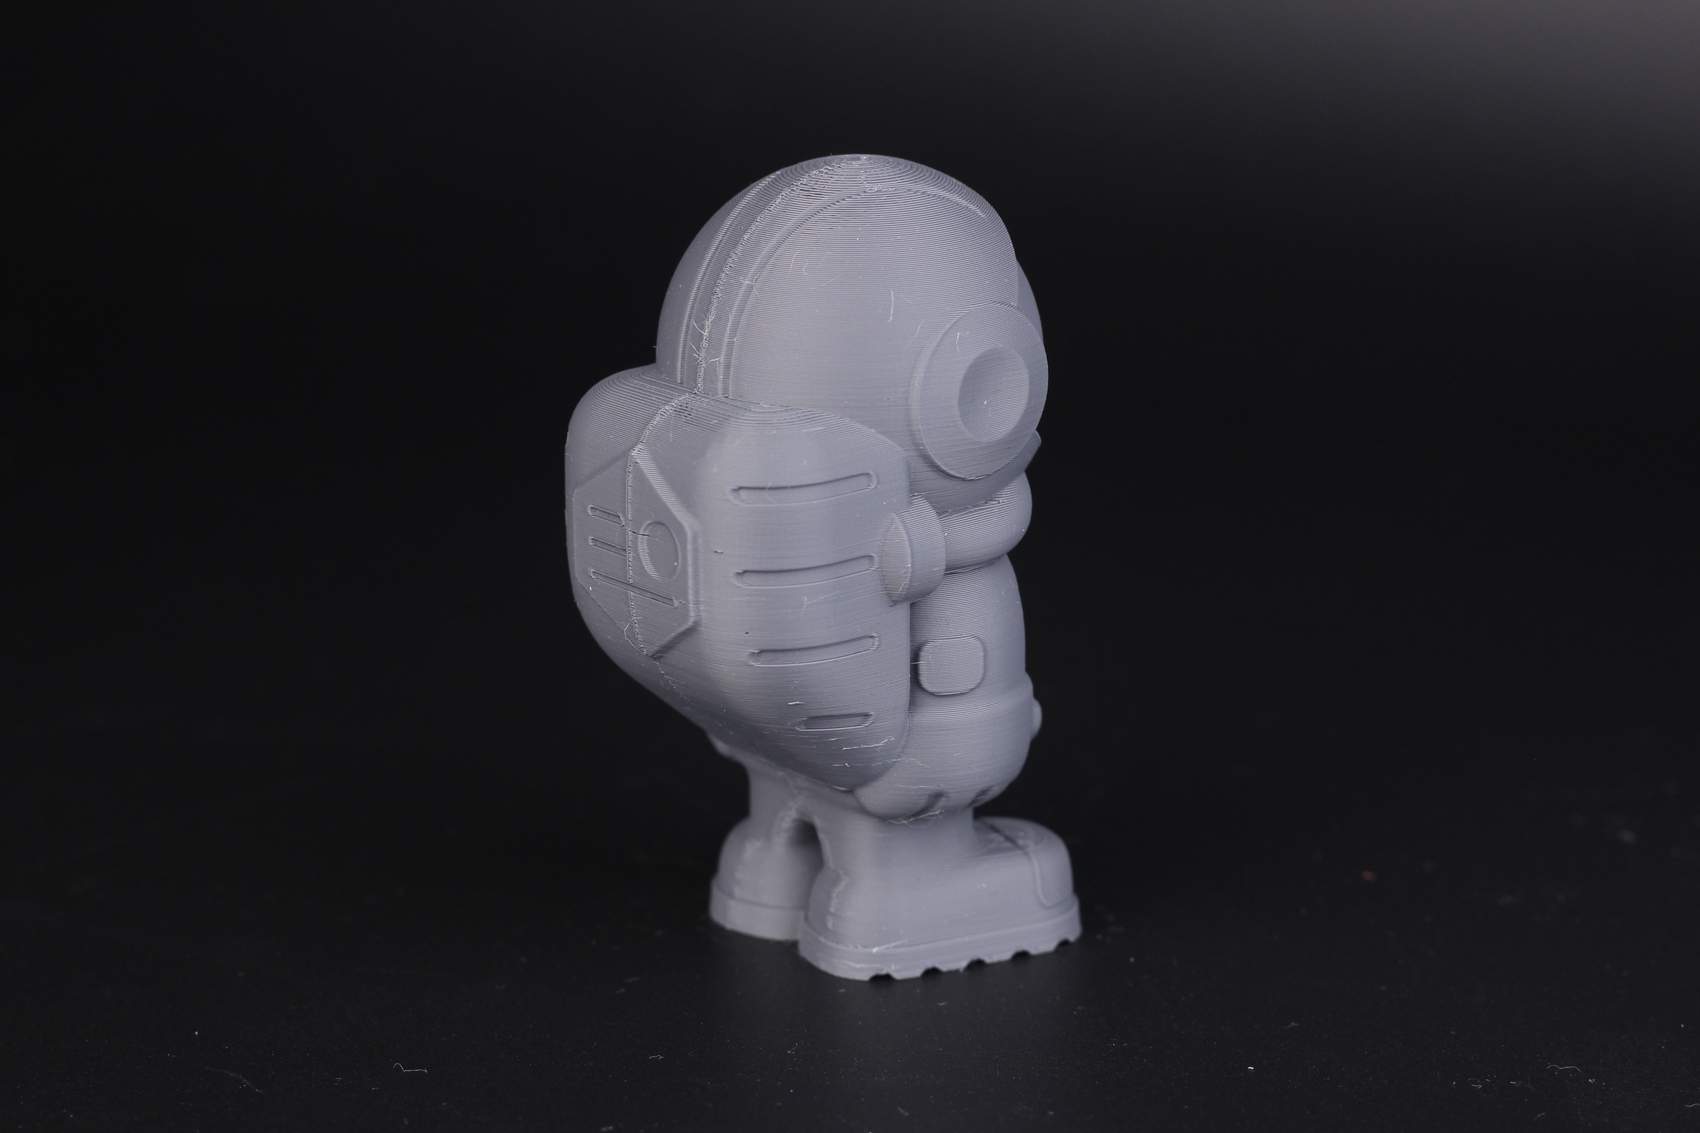 Phil A Ment printed on Ender 3 S1 Pro4 | Creality Ender 3 S1 Pro Review: The Ultimate Ender 3